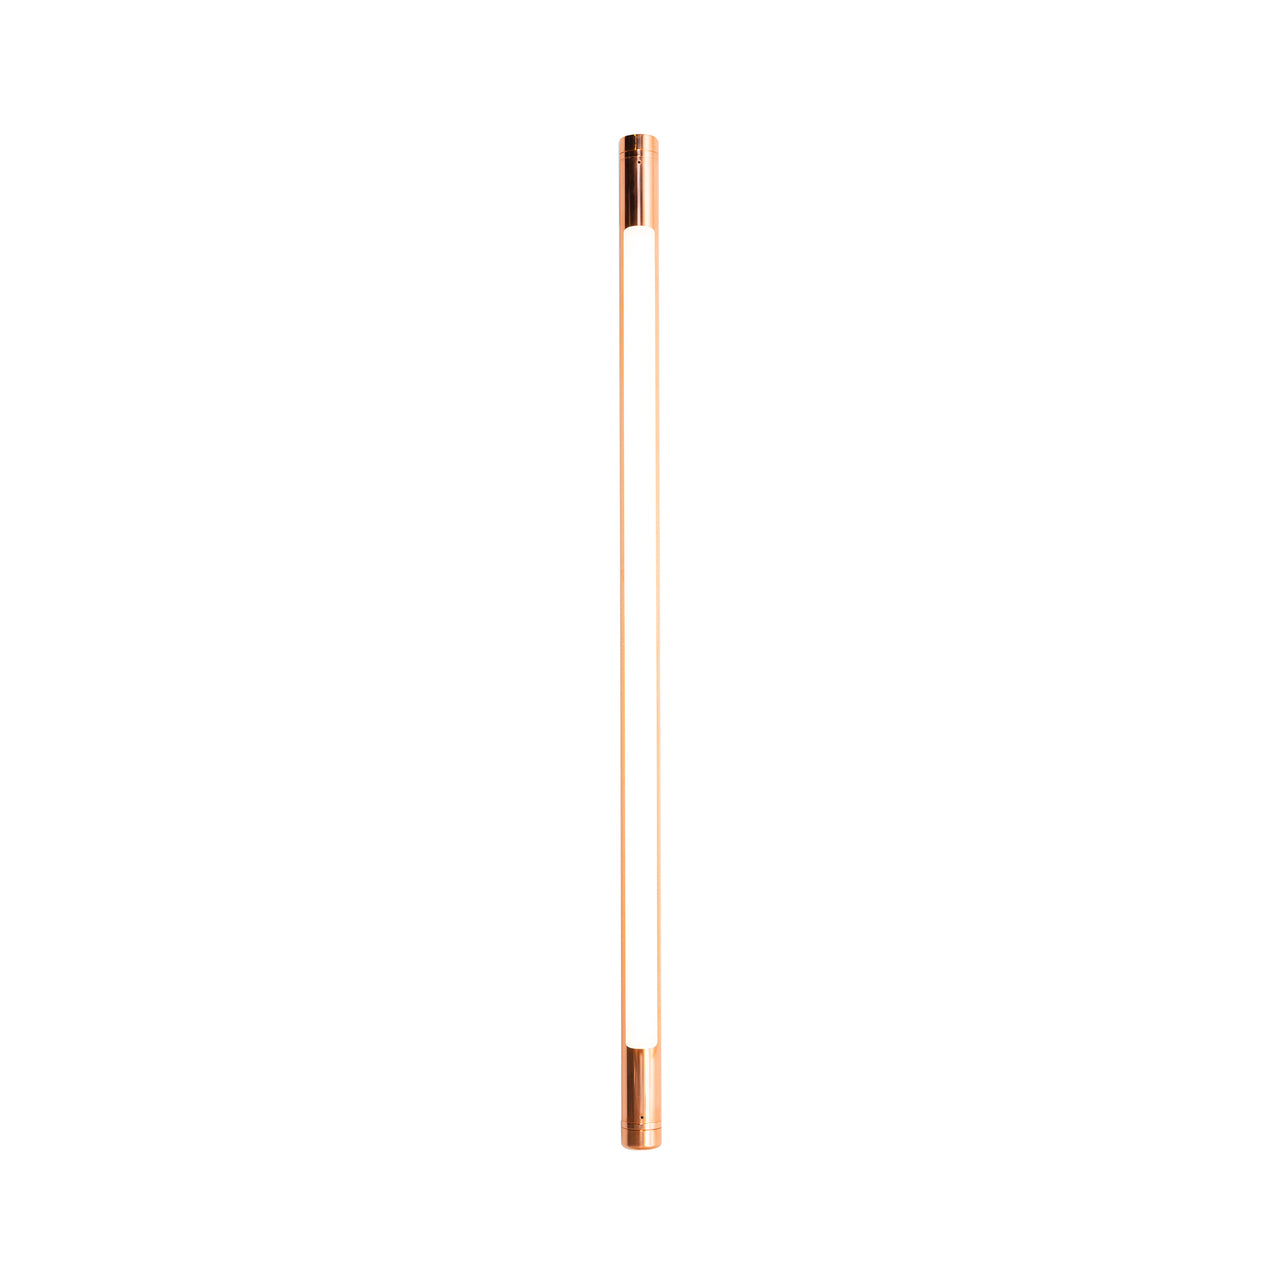 Pipeline 125 Ceiling/Wall Light: Copper